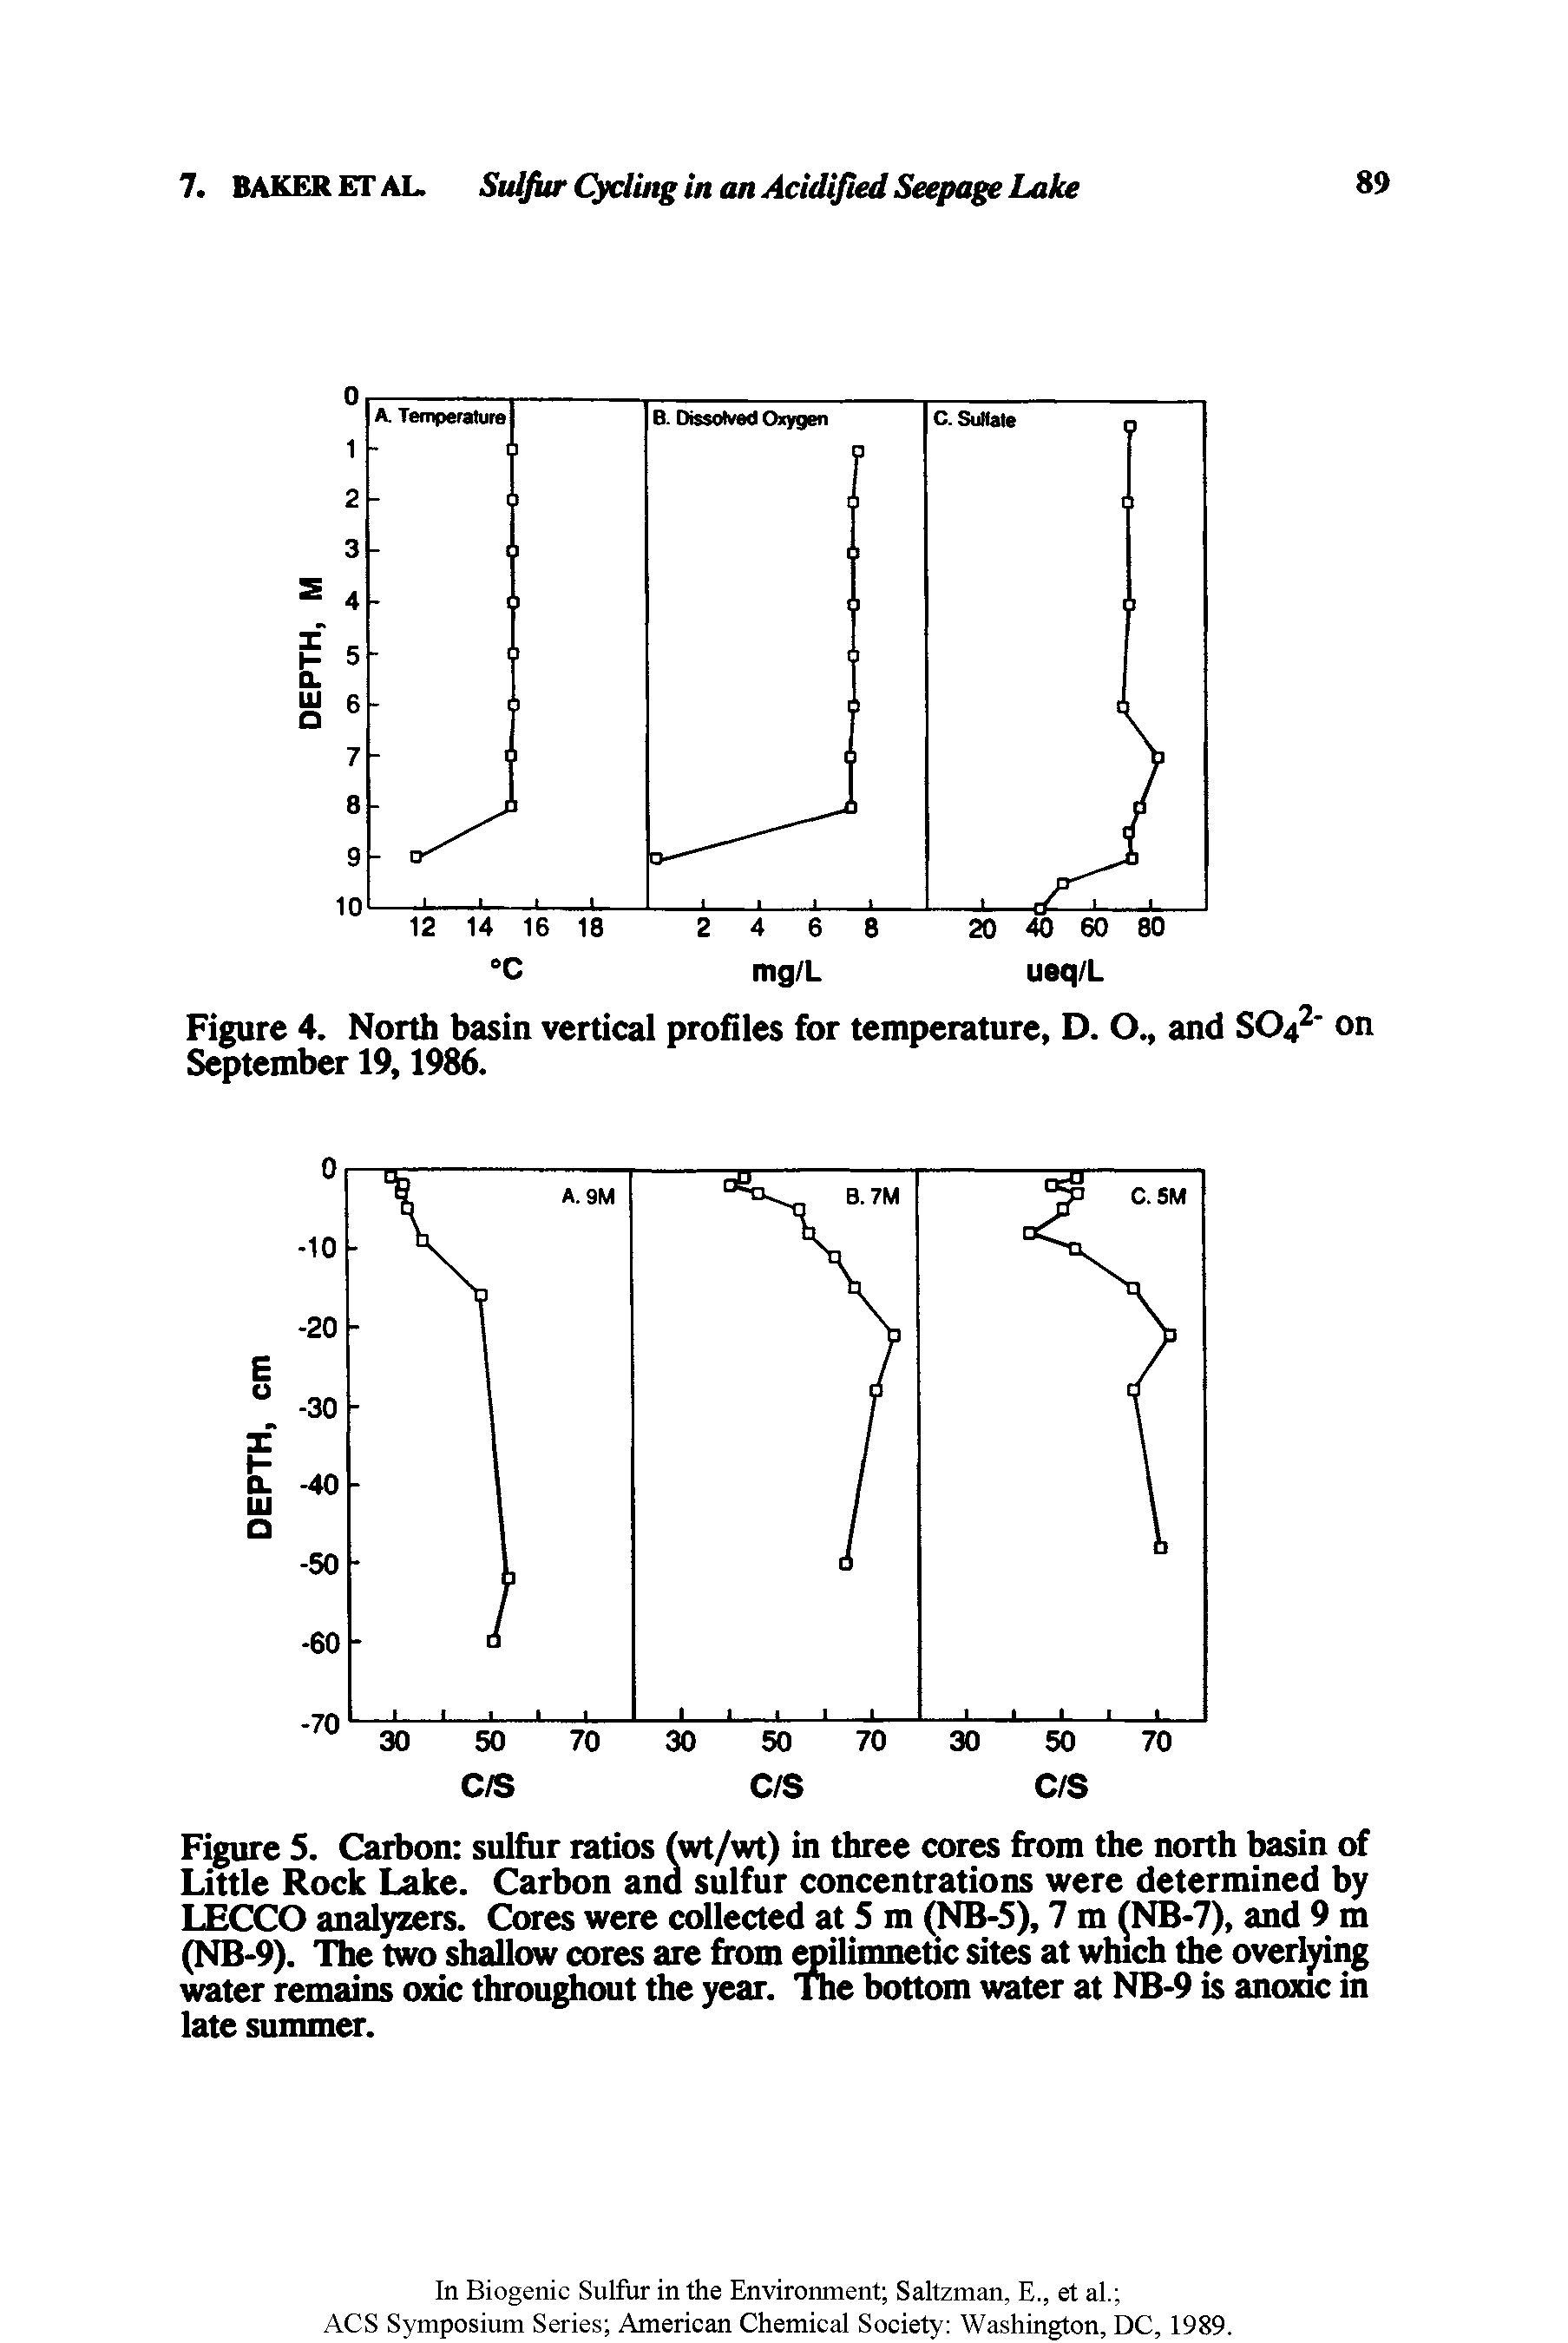 Figure 4. North basin vertical profiles for temperature, D. O., and SO42 on September 19,1986.